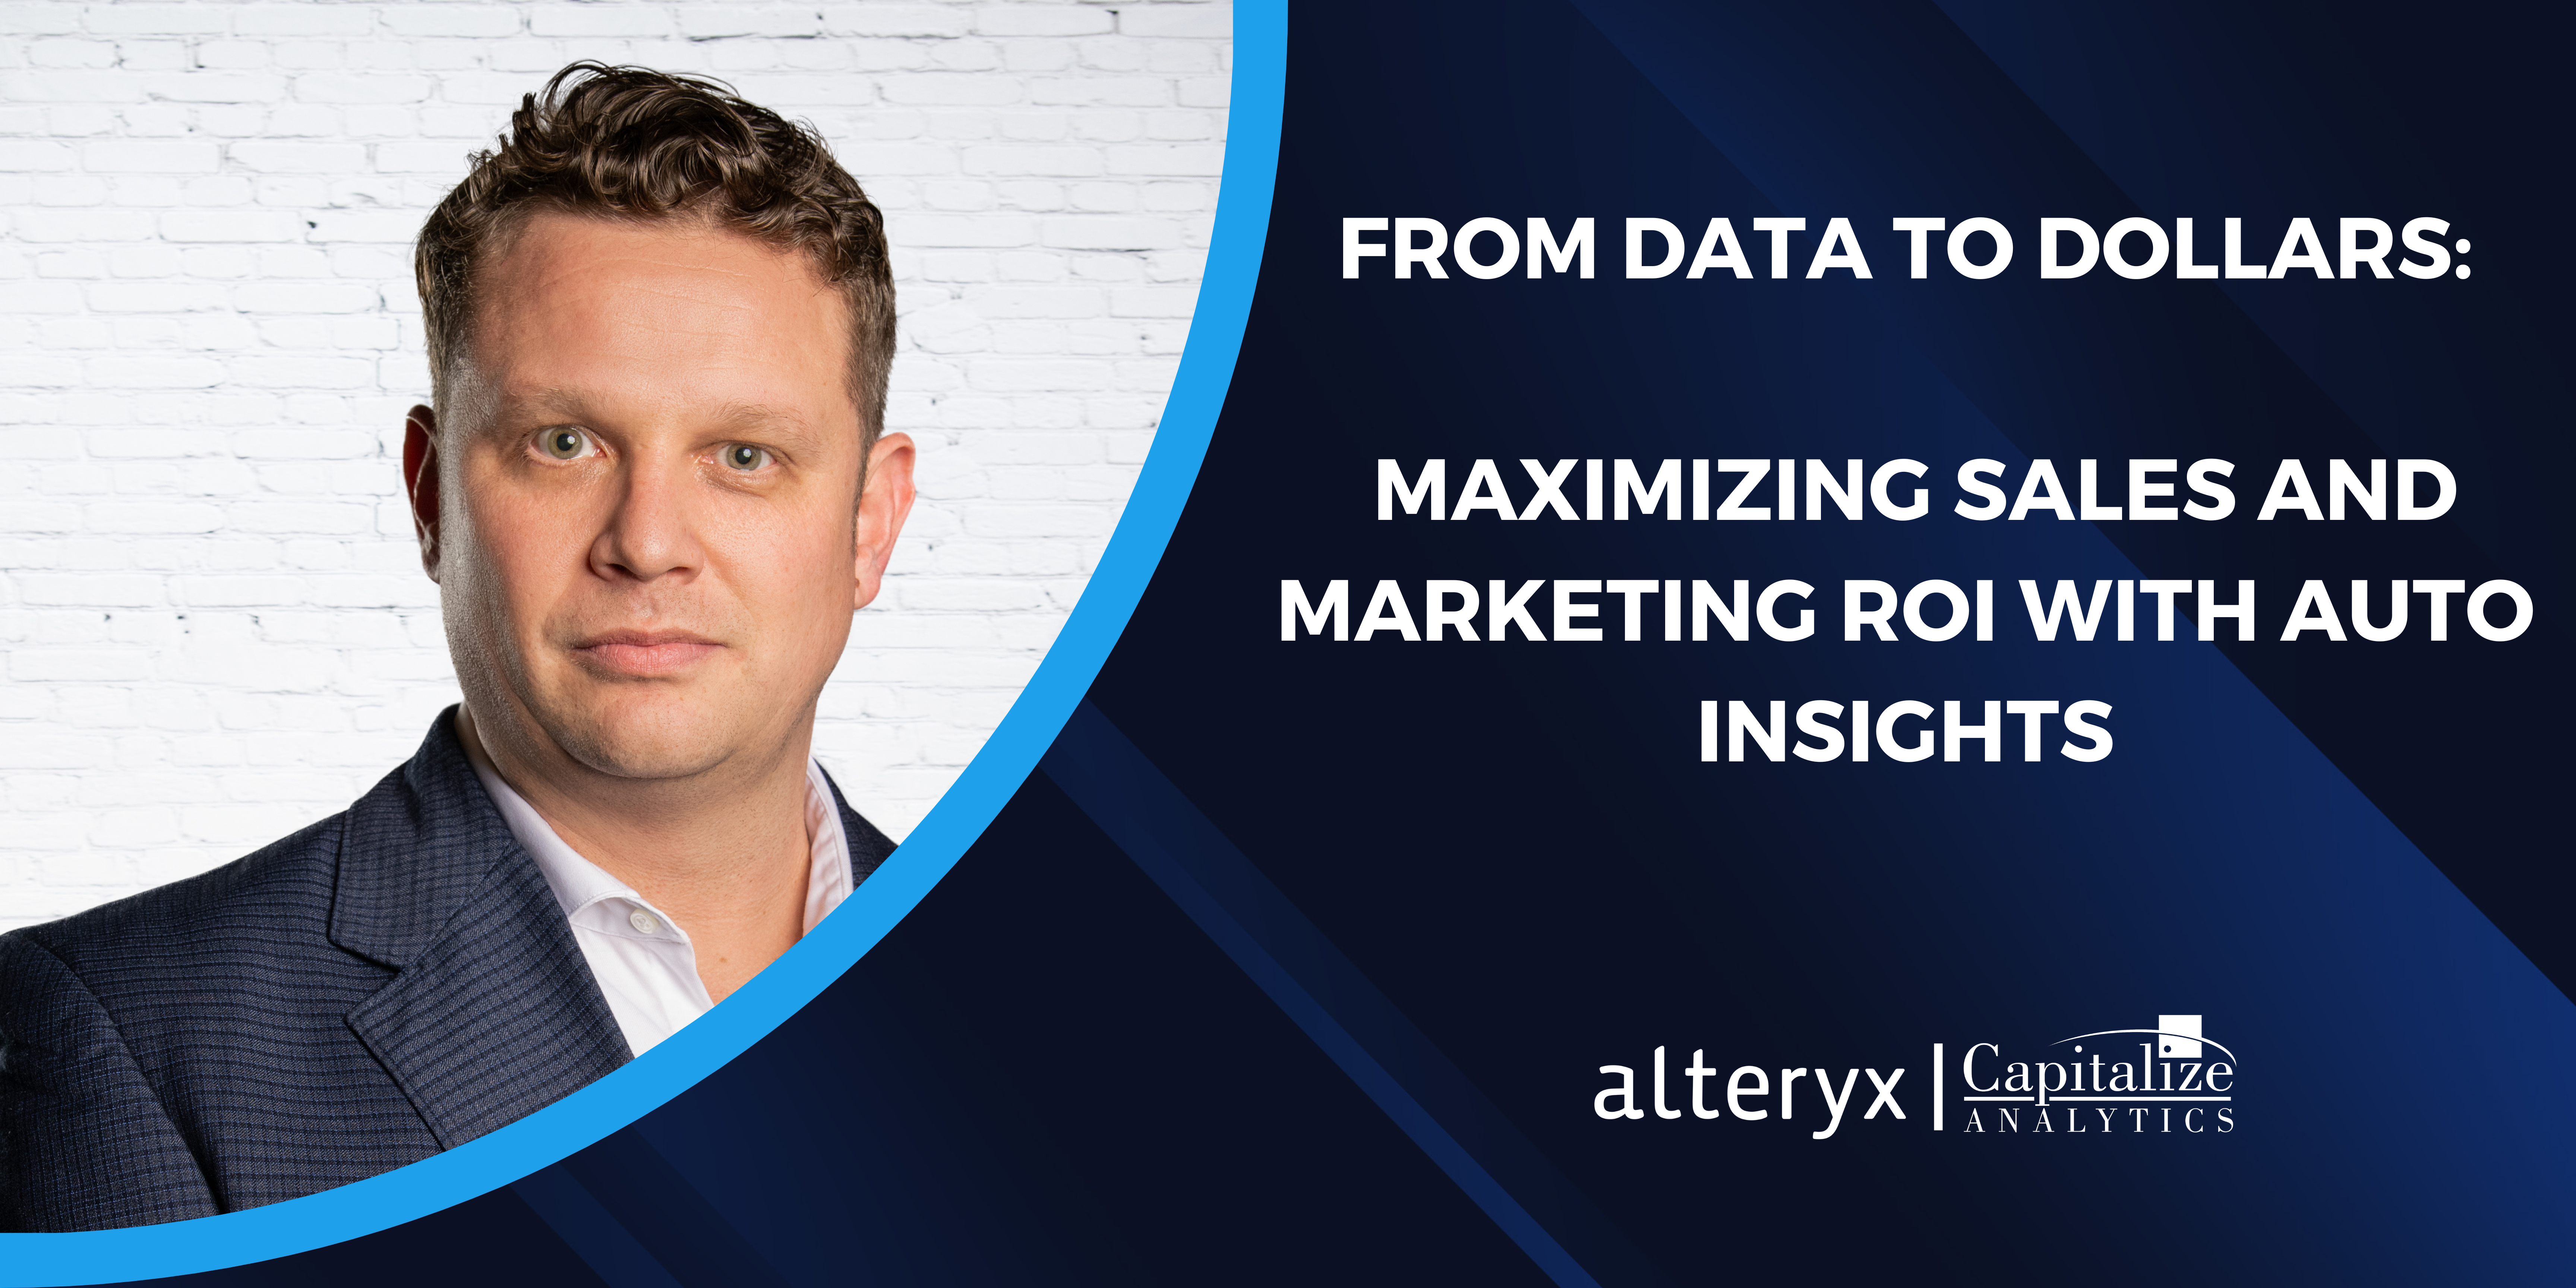 From Data to Dollars: Maximizing Sales and Marketing ROI with Auto Insights